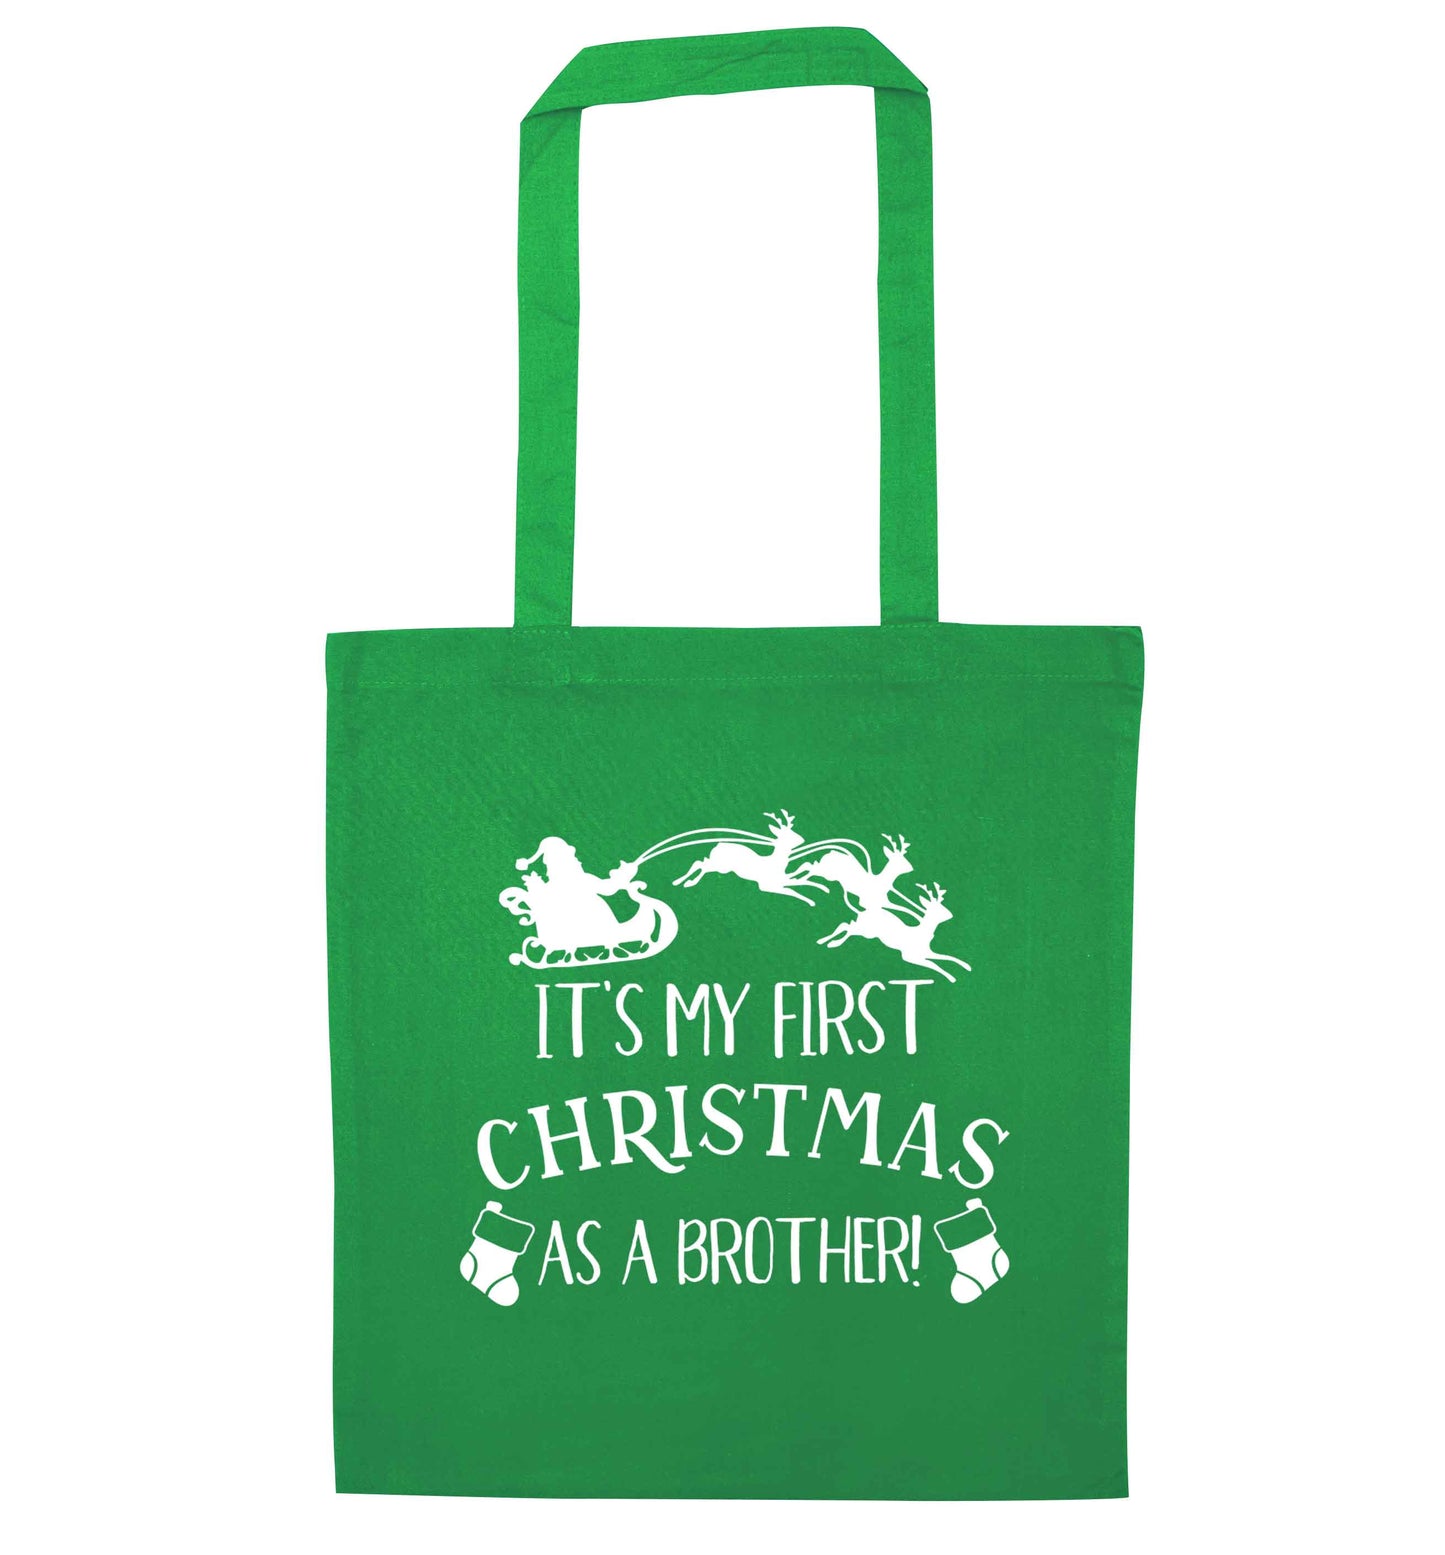 It's my first Christmas as a brother! green tote bag